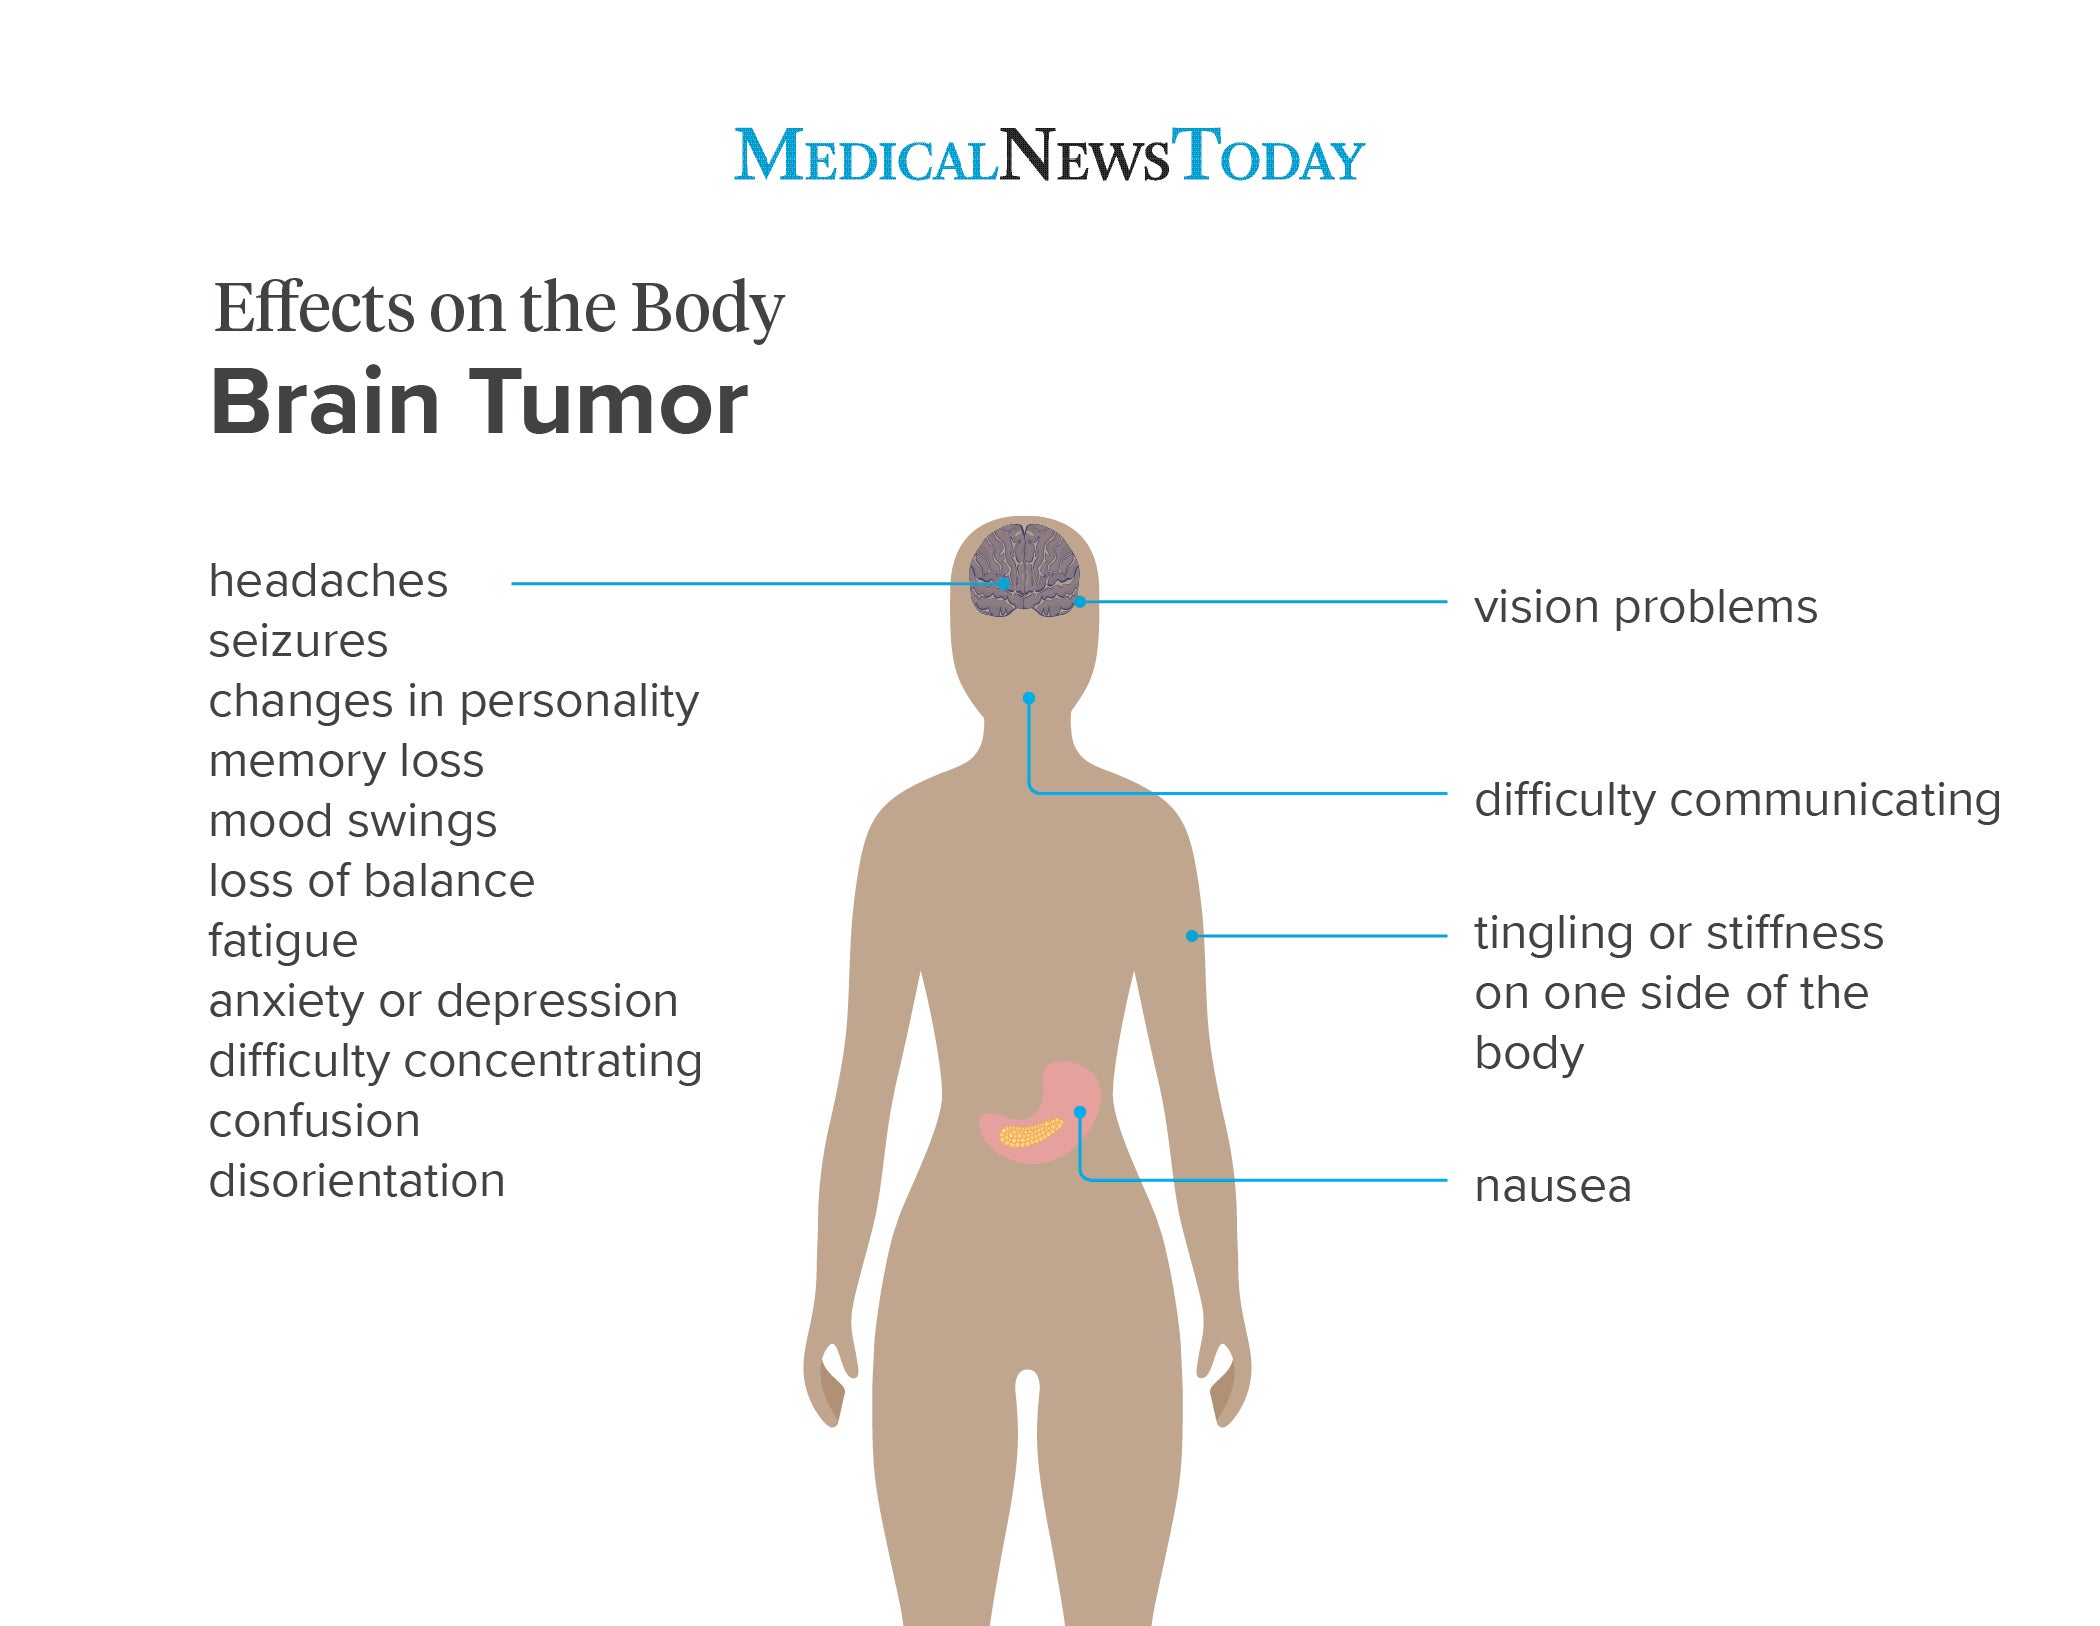 Chemotherapy for brain tumours